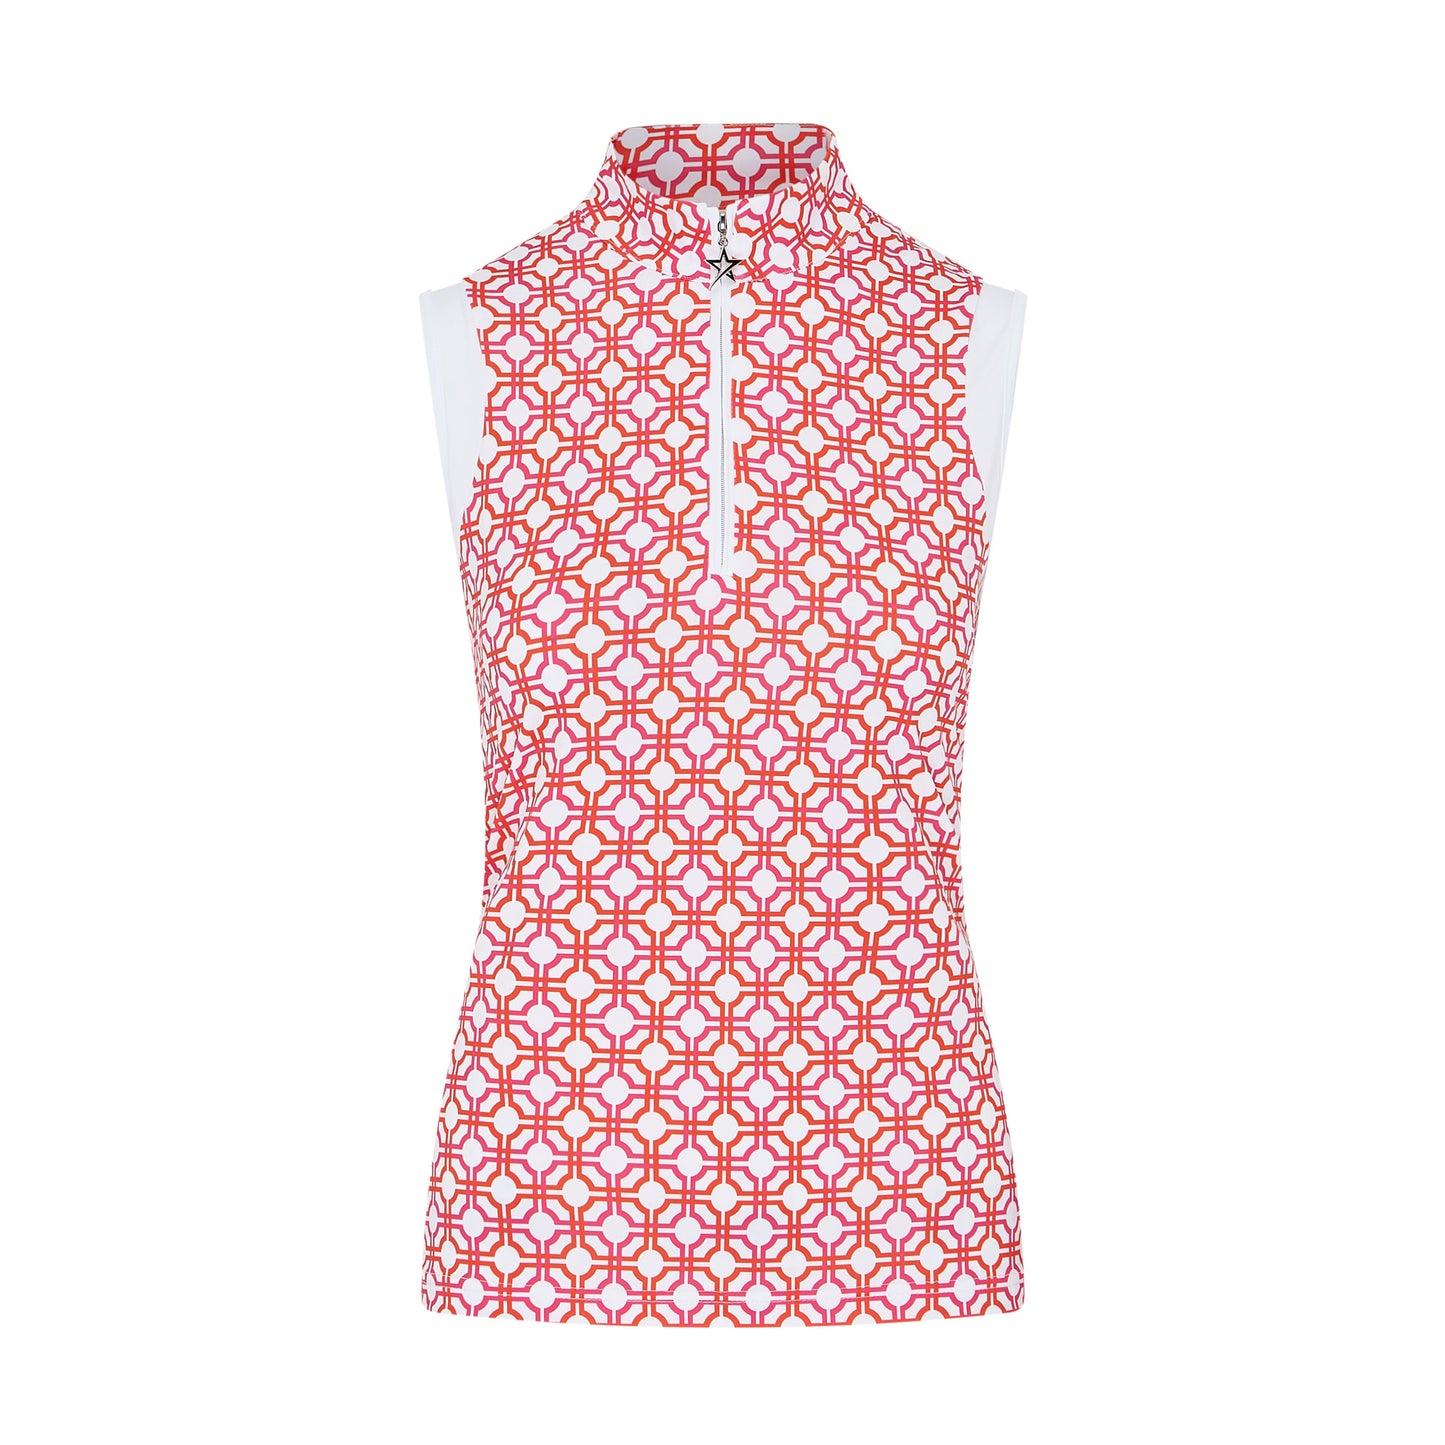 Swing Out Sister Sleeveless Zip-Neck Polo in Lush Pink and Mandarin Mosaic Print